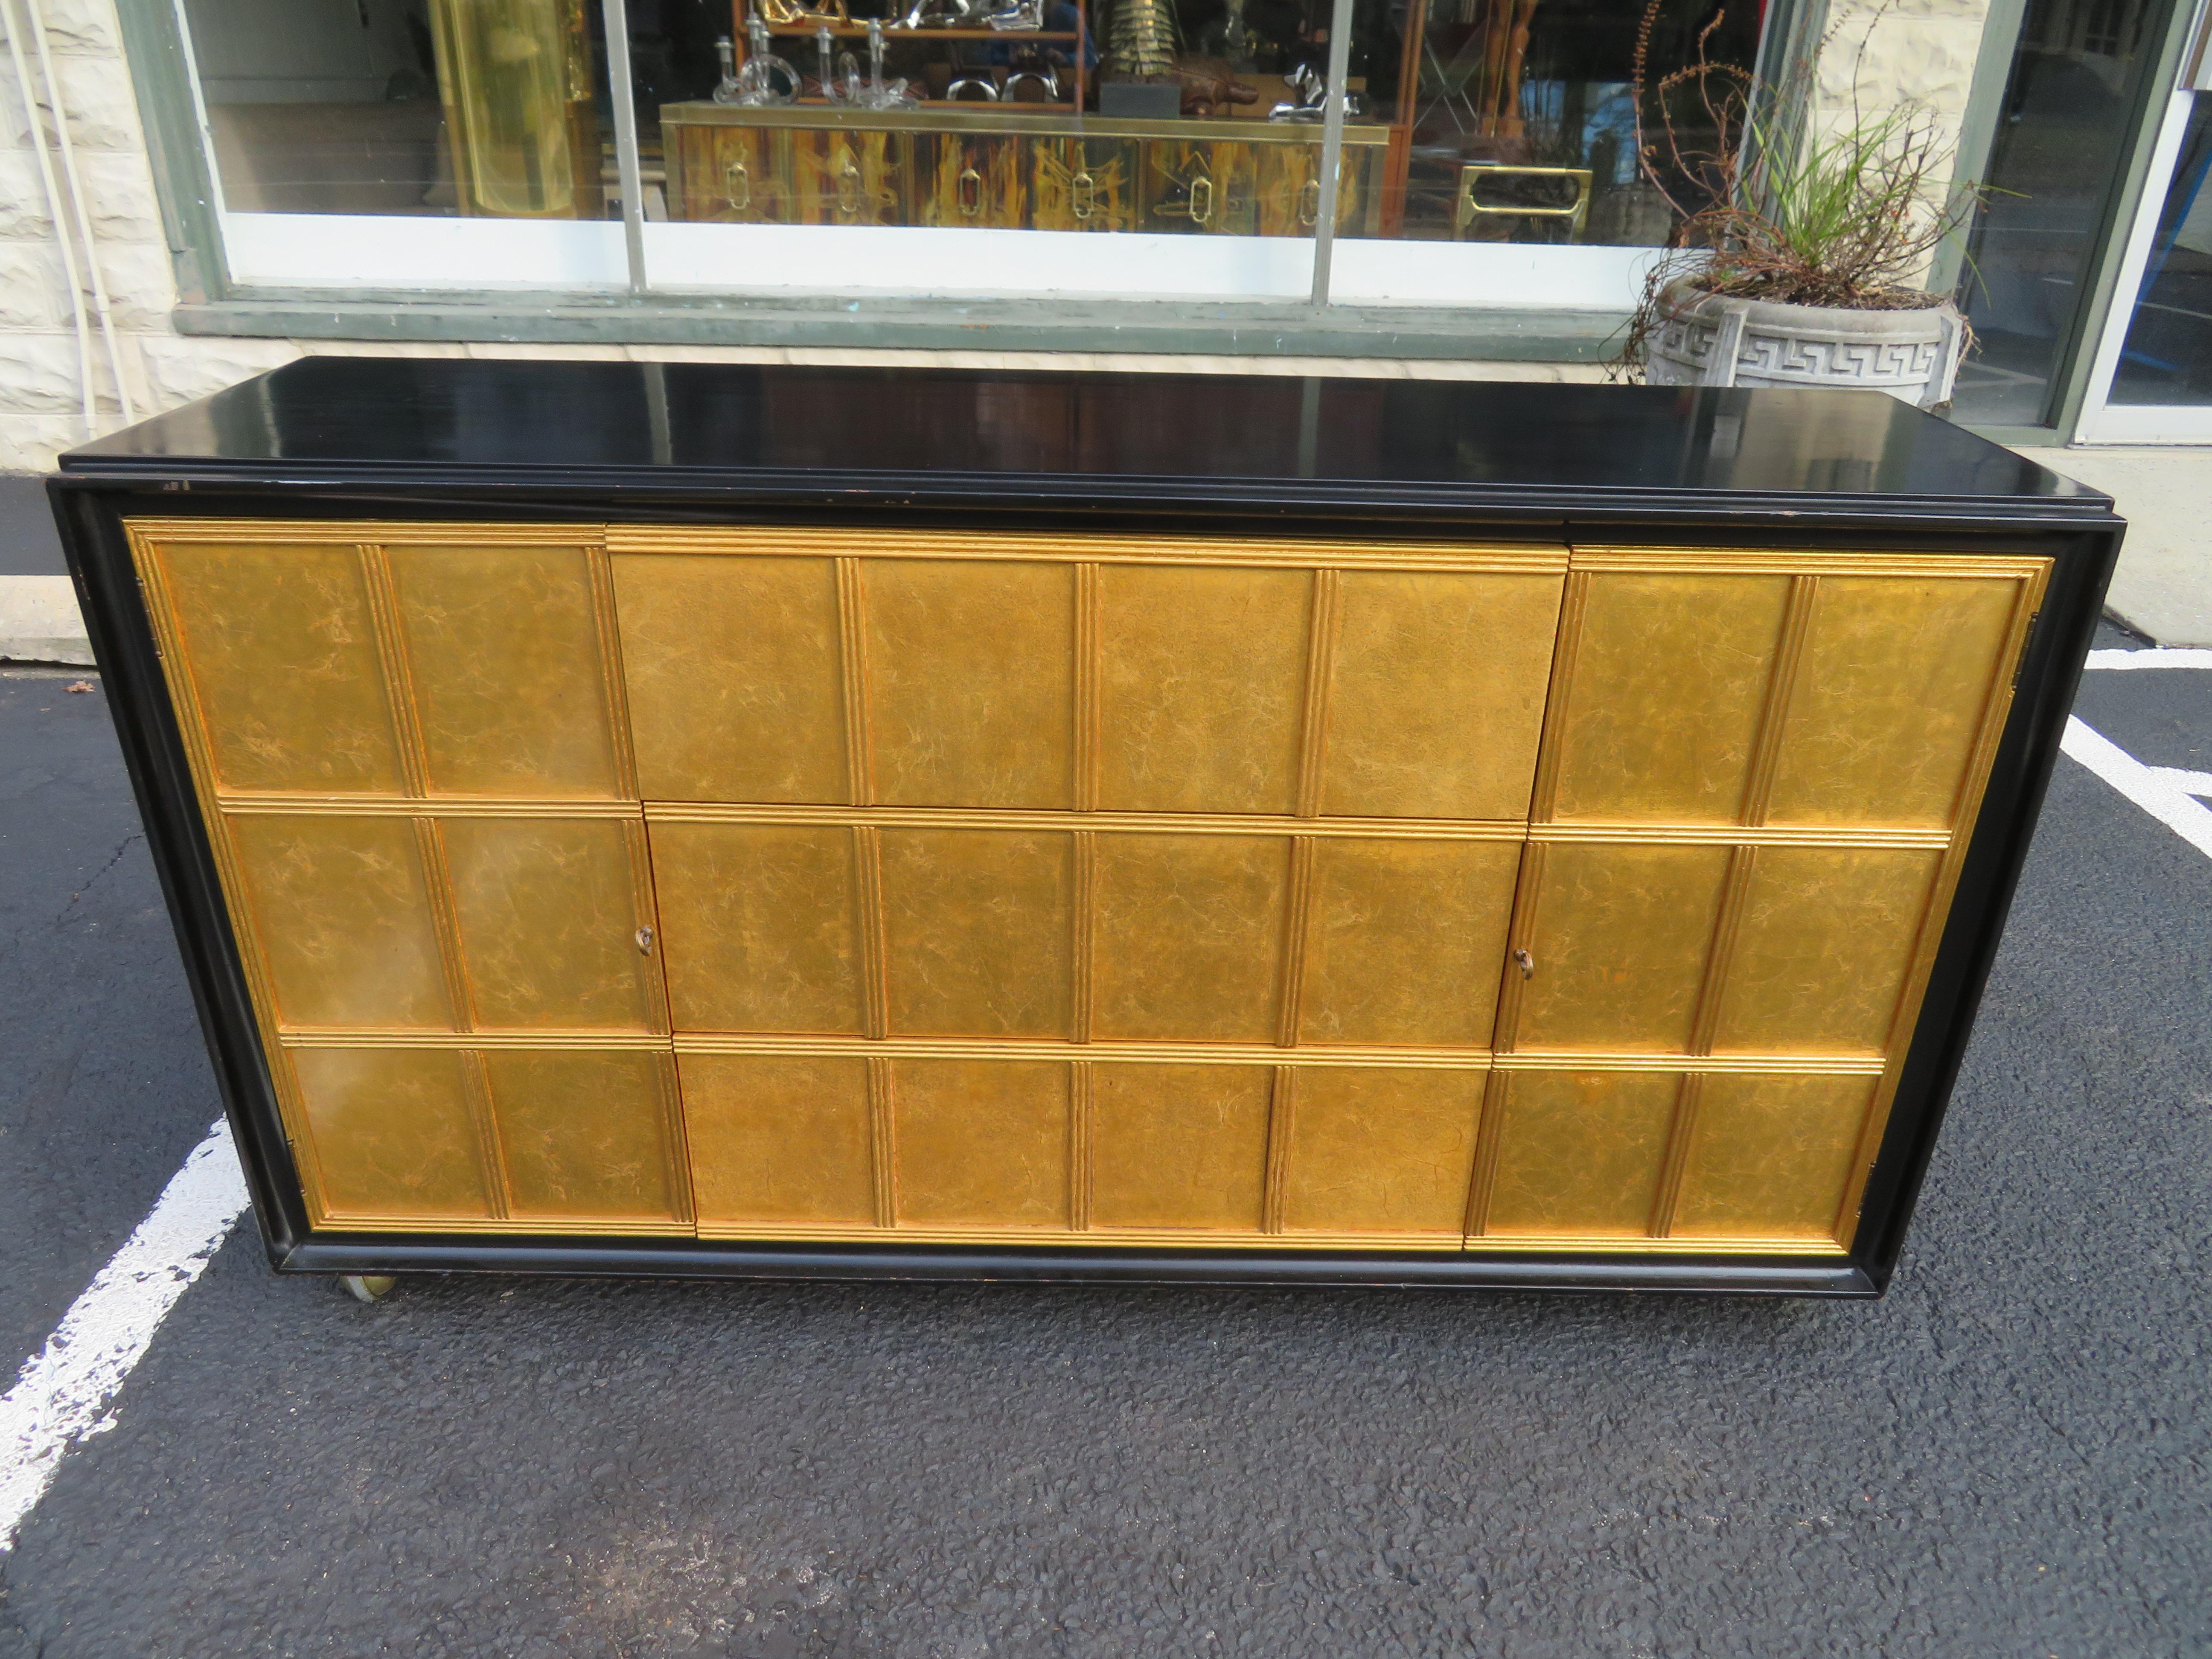 Lovely Dorothy Draper Style Gold Leaf Front Buffet Credenza Mid-Century Modern 11